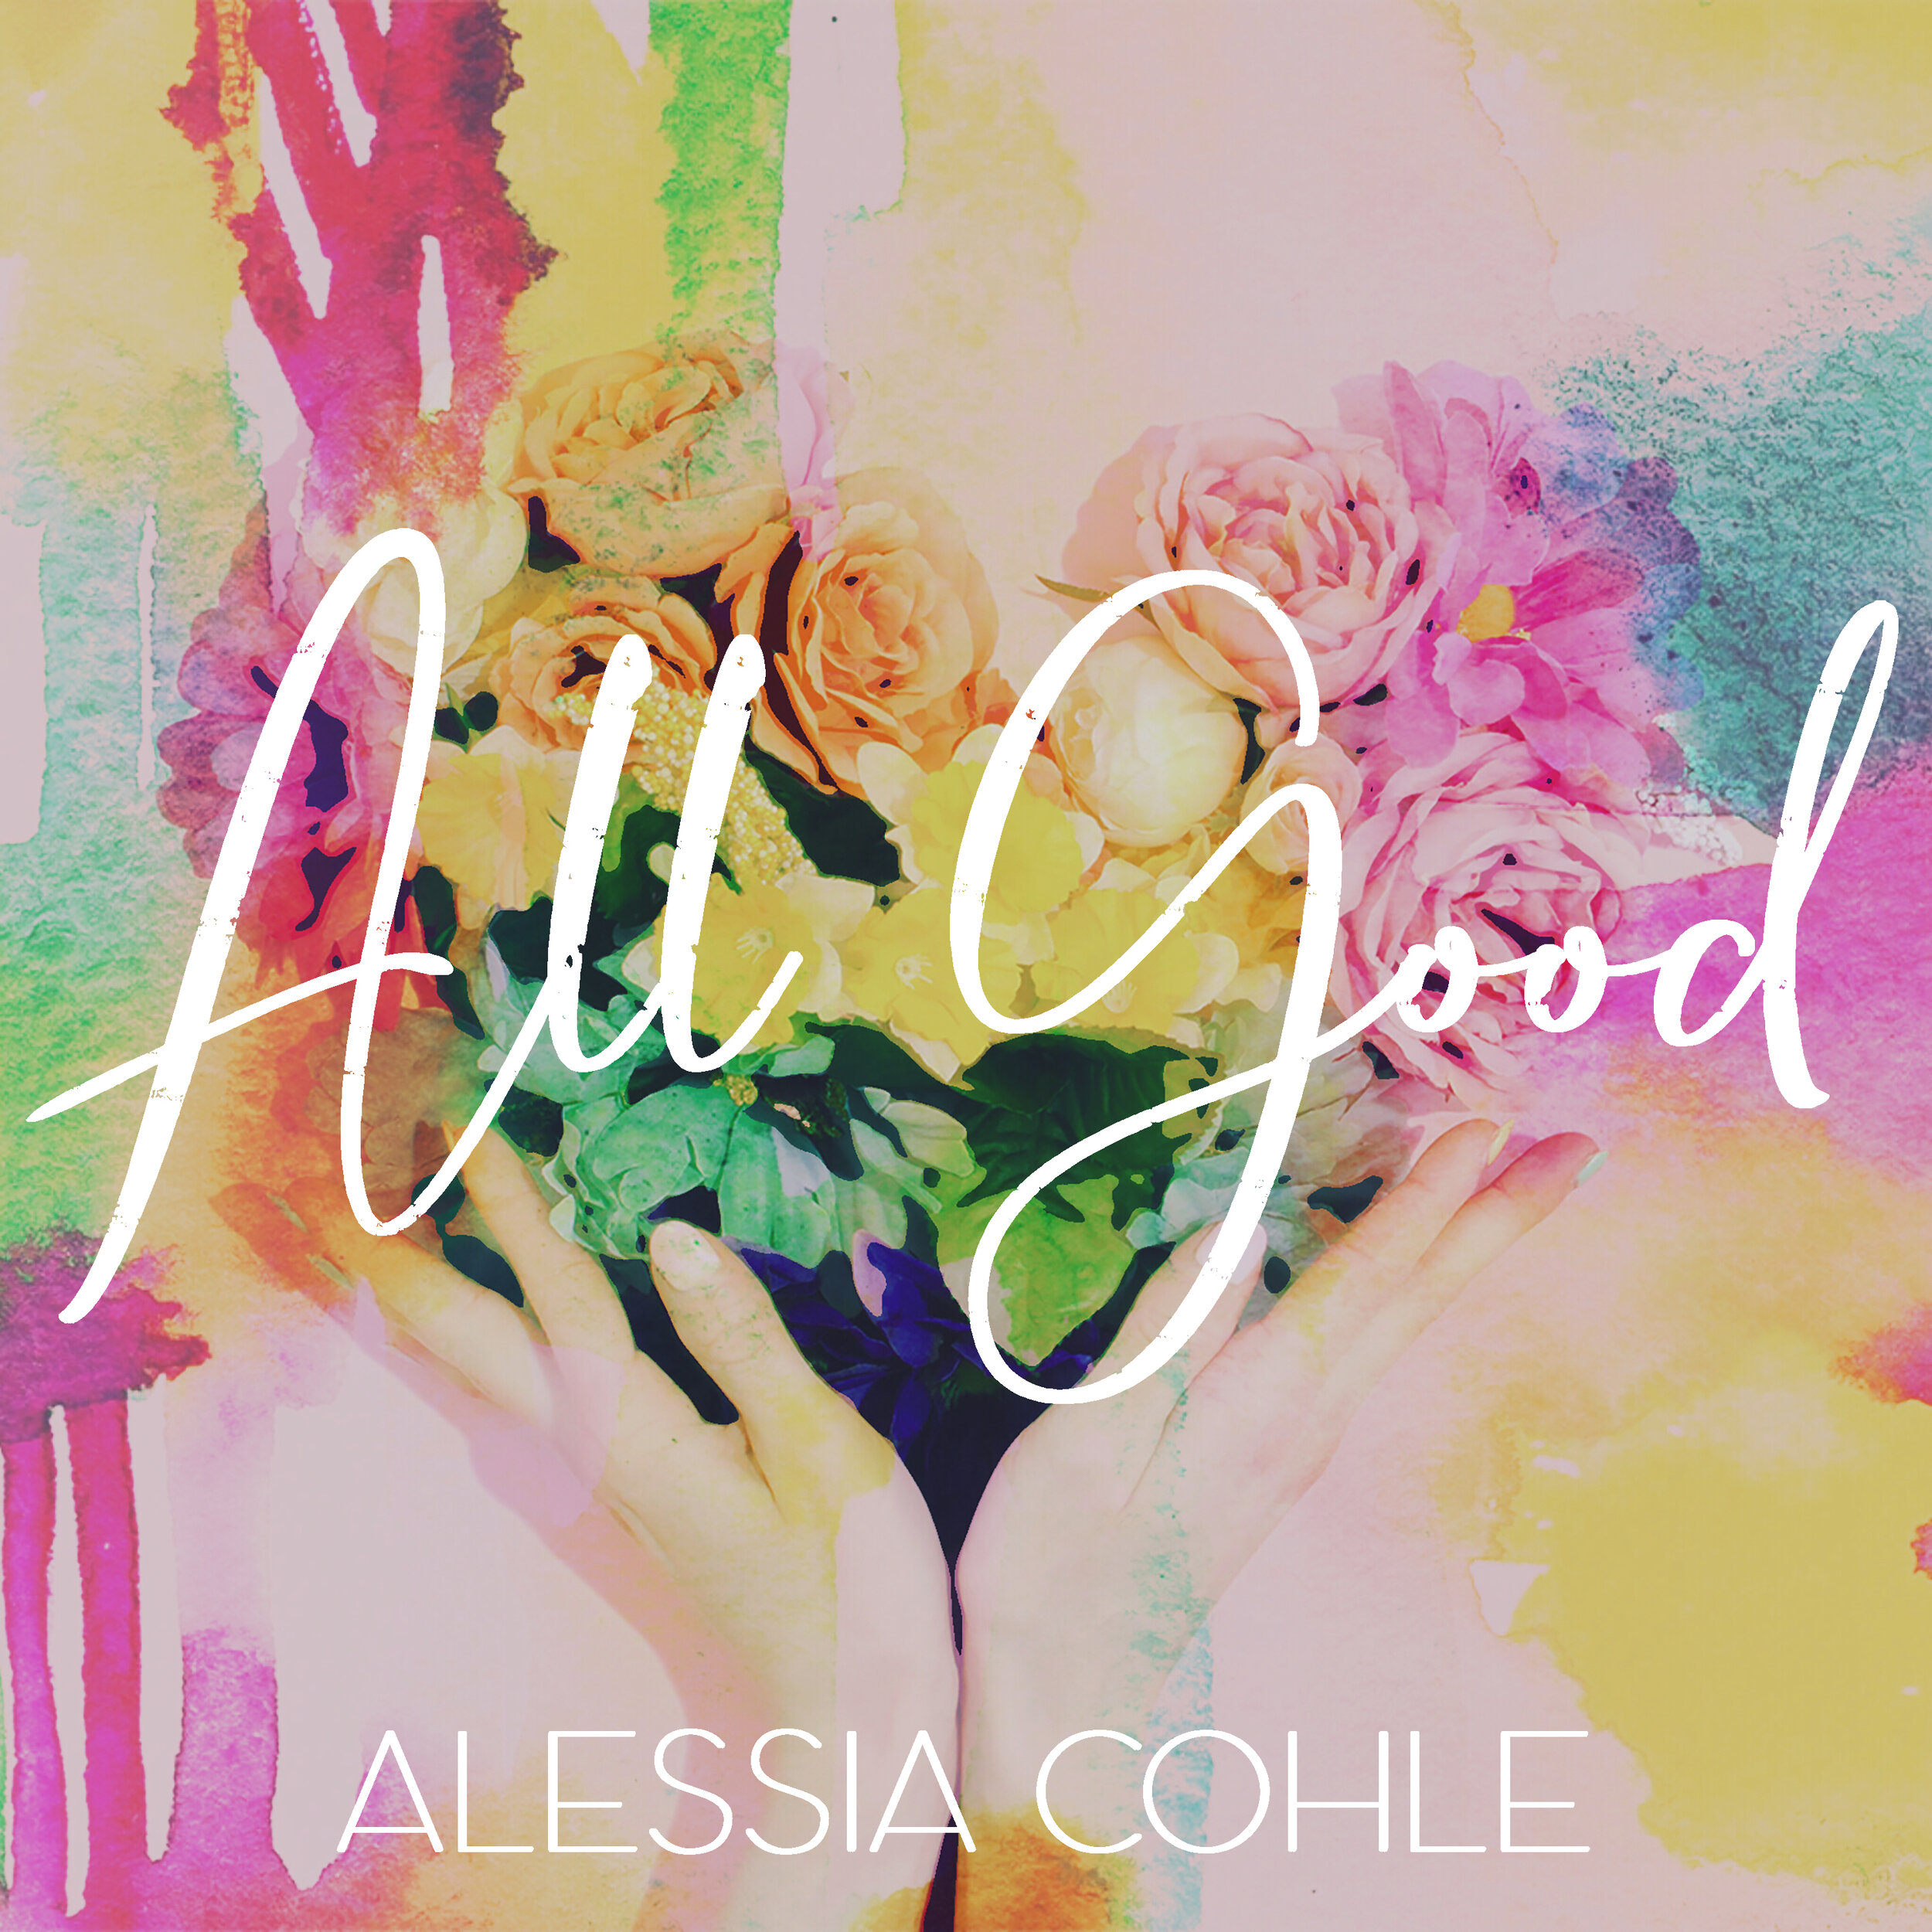 Alessia Cohle - All Good_CoverArt.jpg